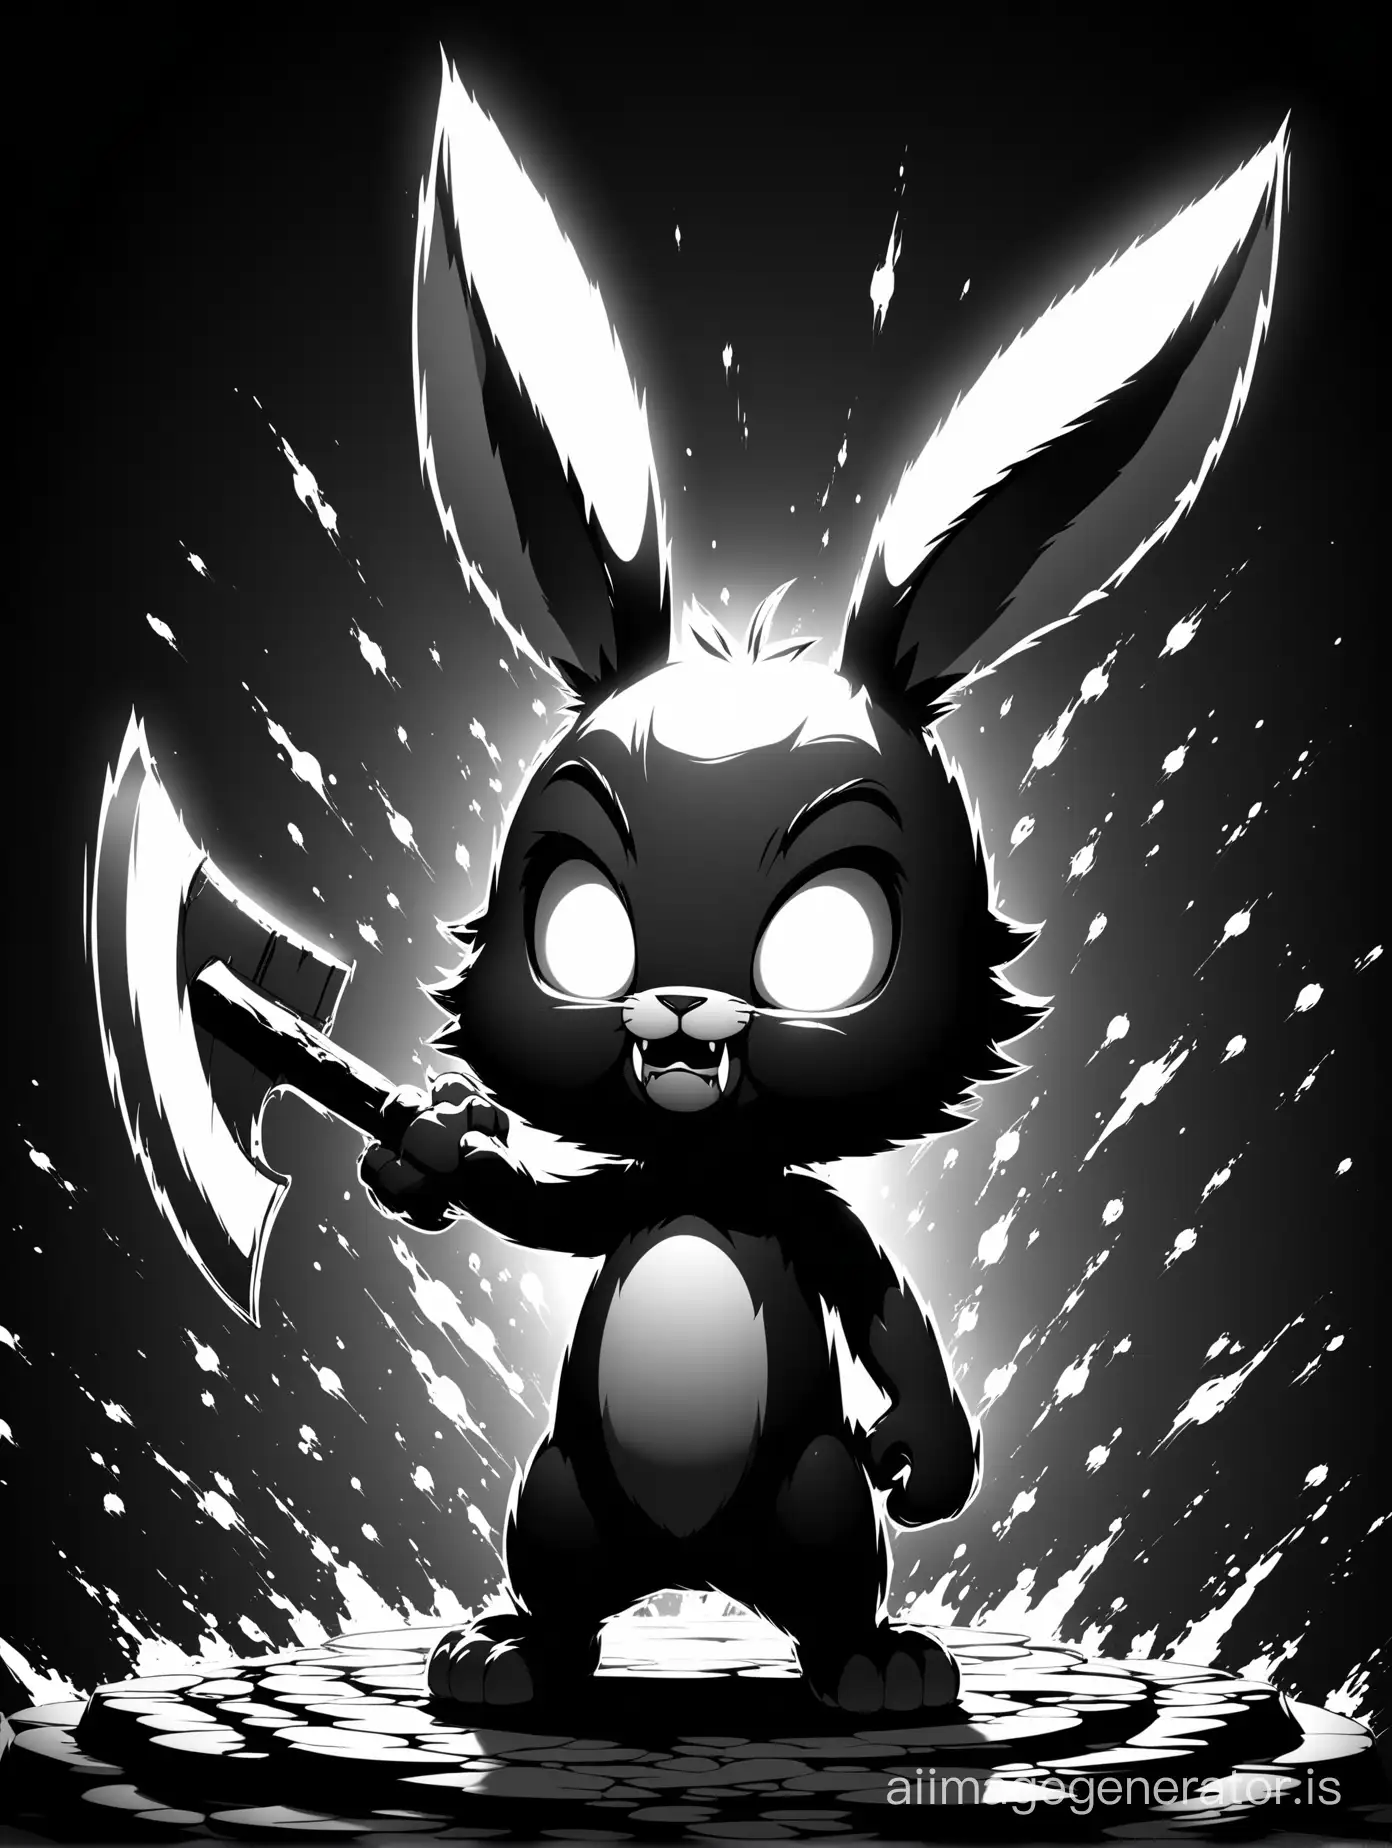 Fantasy-Demonic-Rabbit-with-Ax-in-Monochrome-3D-Vector-Style